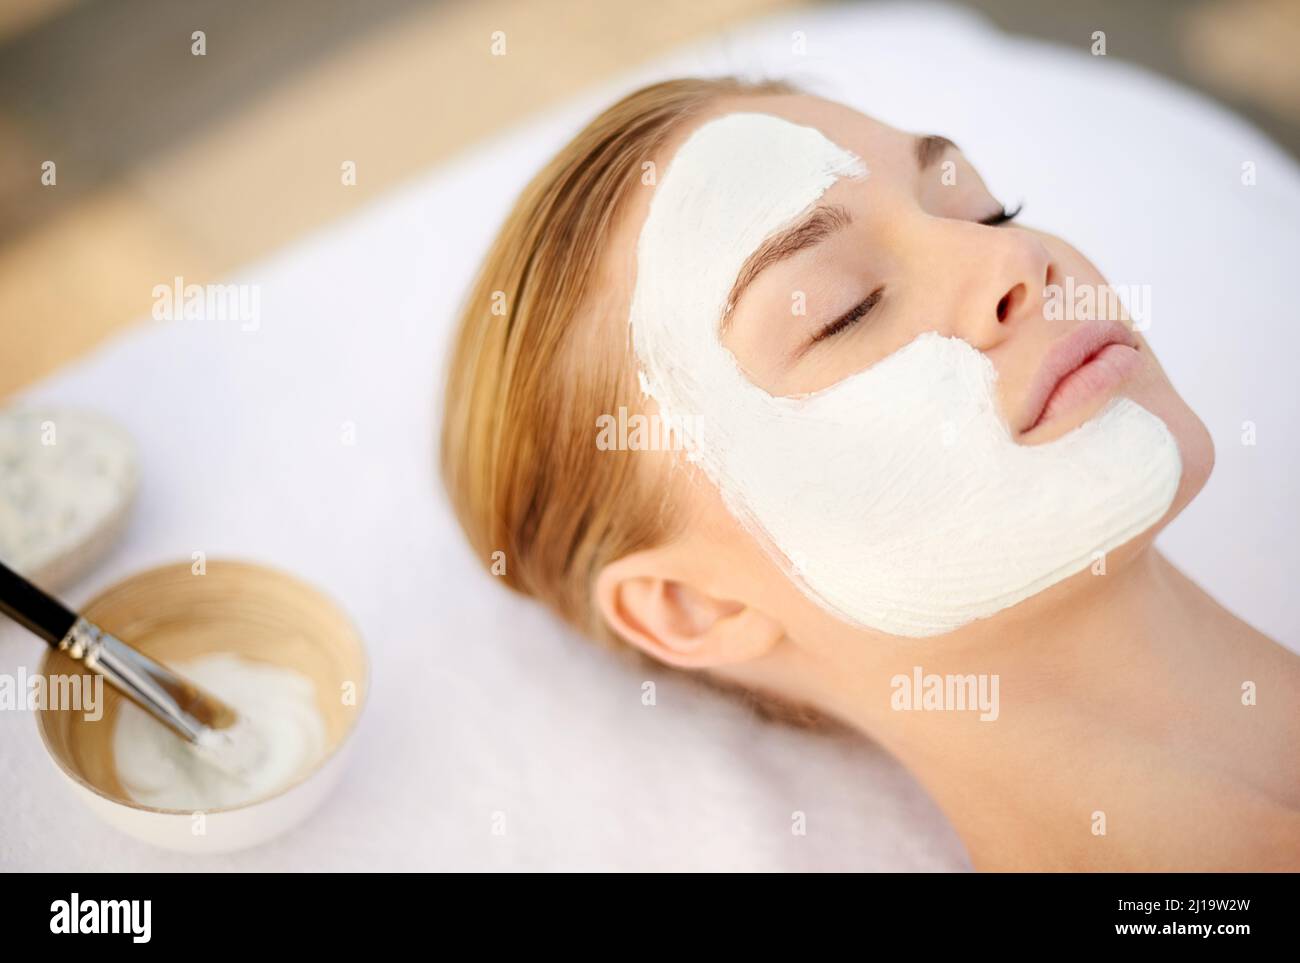 Indulging in a deep cleansing masque. Shot of a young woman getting a facial at a spa. Stock Photo